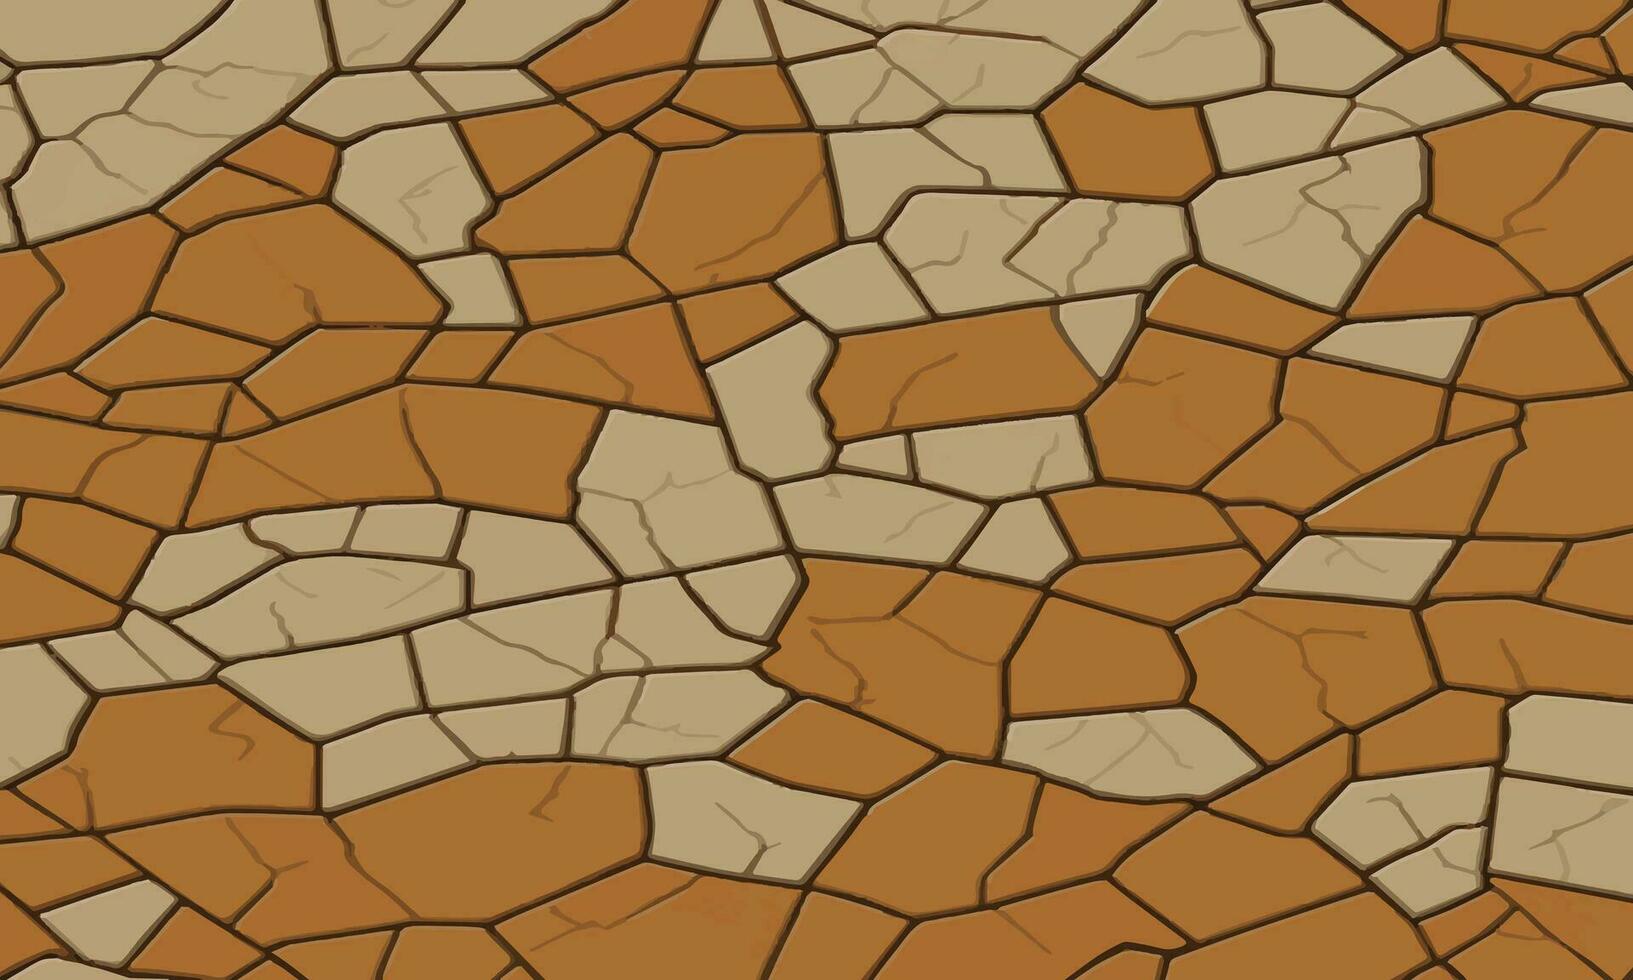 Dry soil brown surface cracked ground texture background. dry soil surface cracked ground texture vector